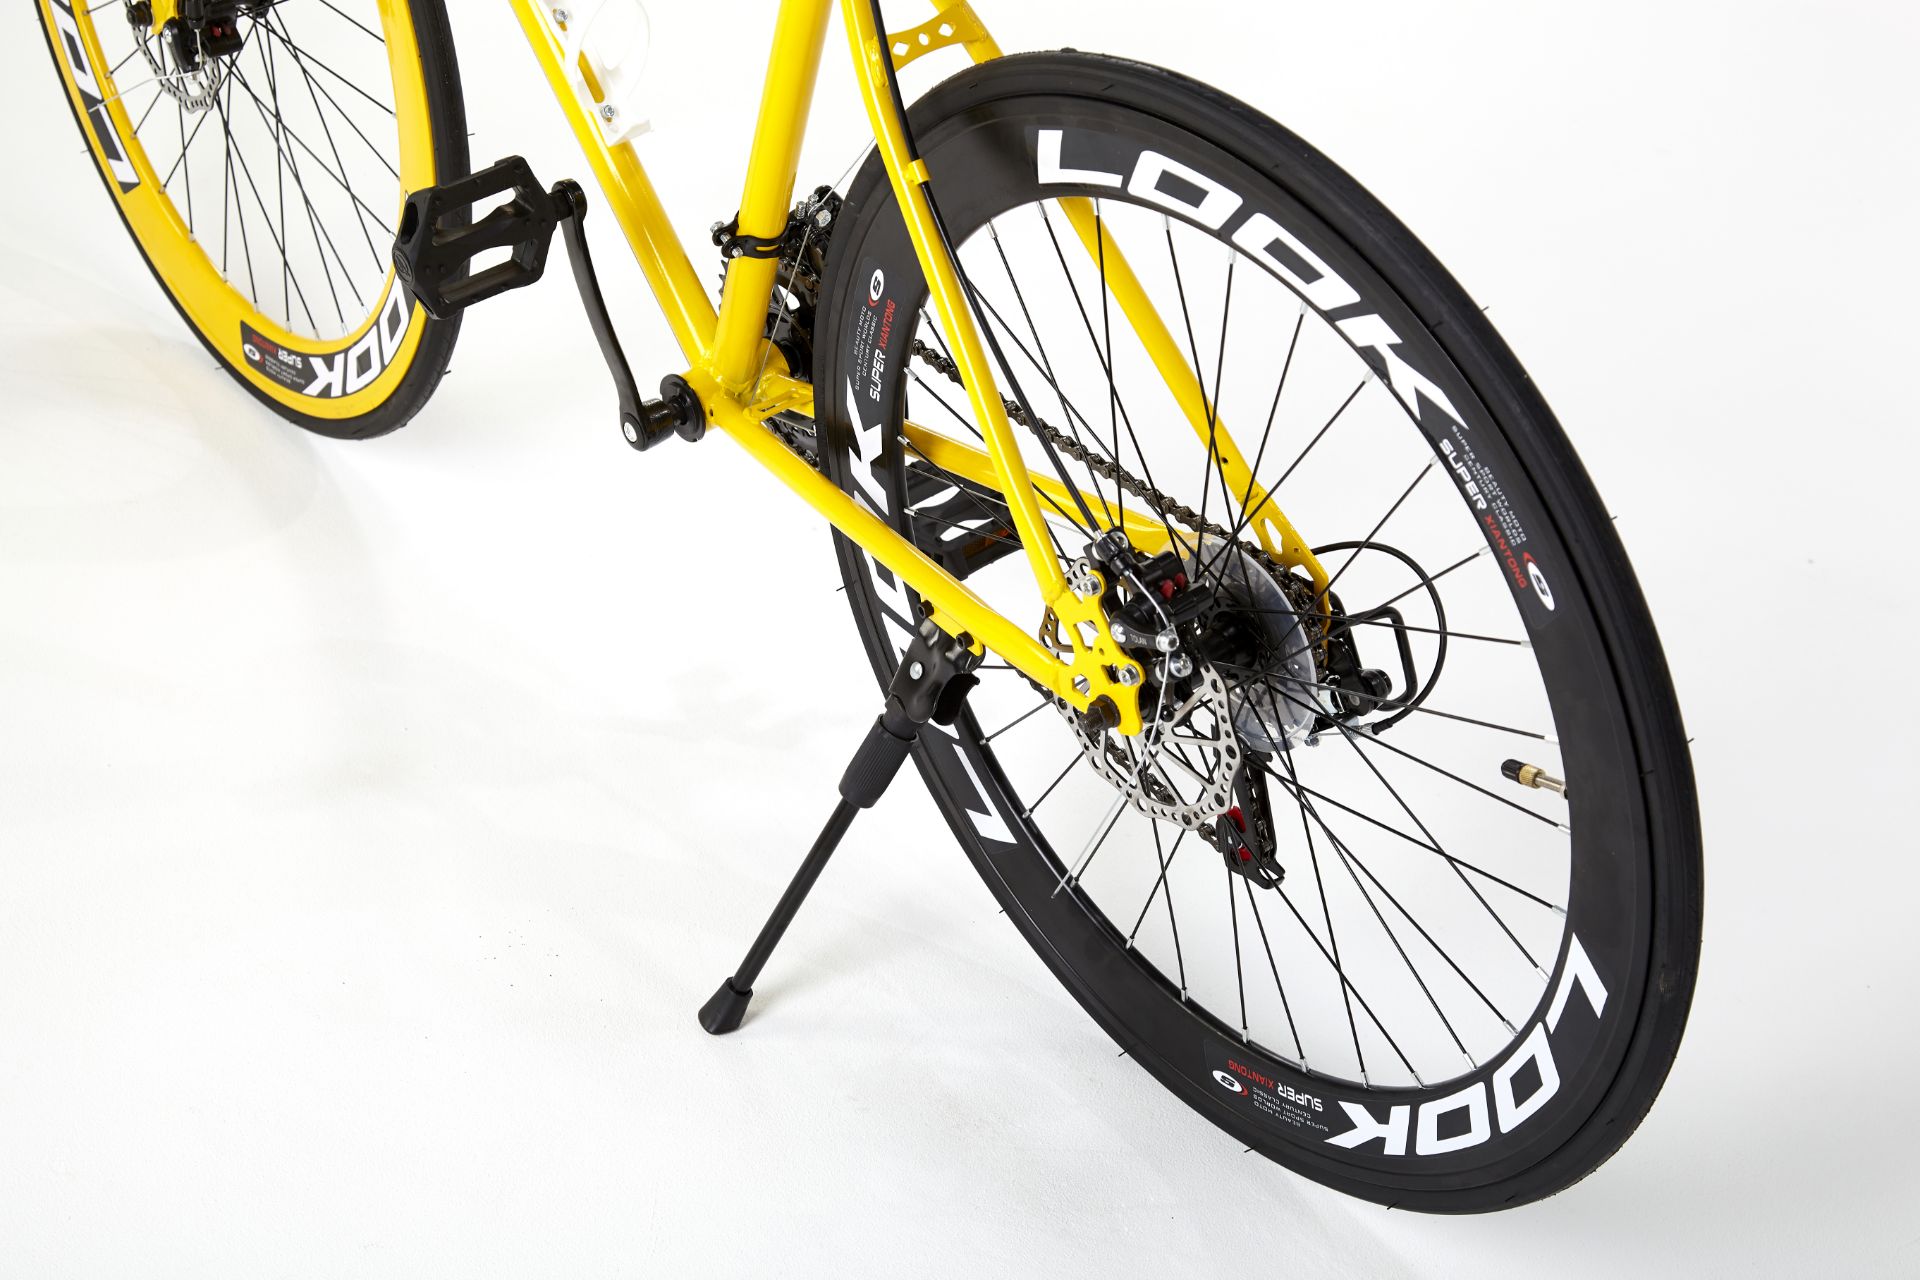 YELLOW STREET BIKE WITH 21 GREAR, BRAKE DISKS, KICK STAND, COOL THIN TYRES - Image 10 of 10